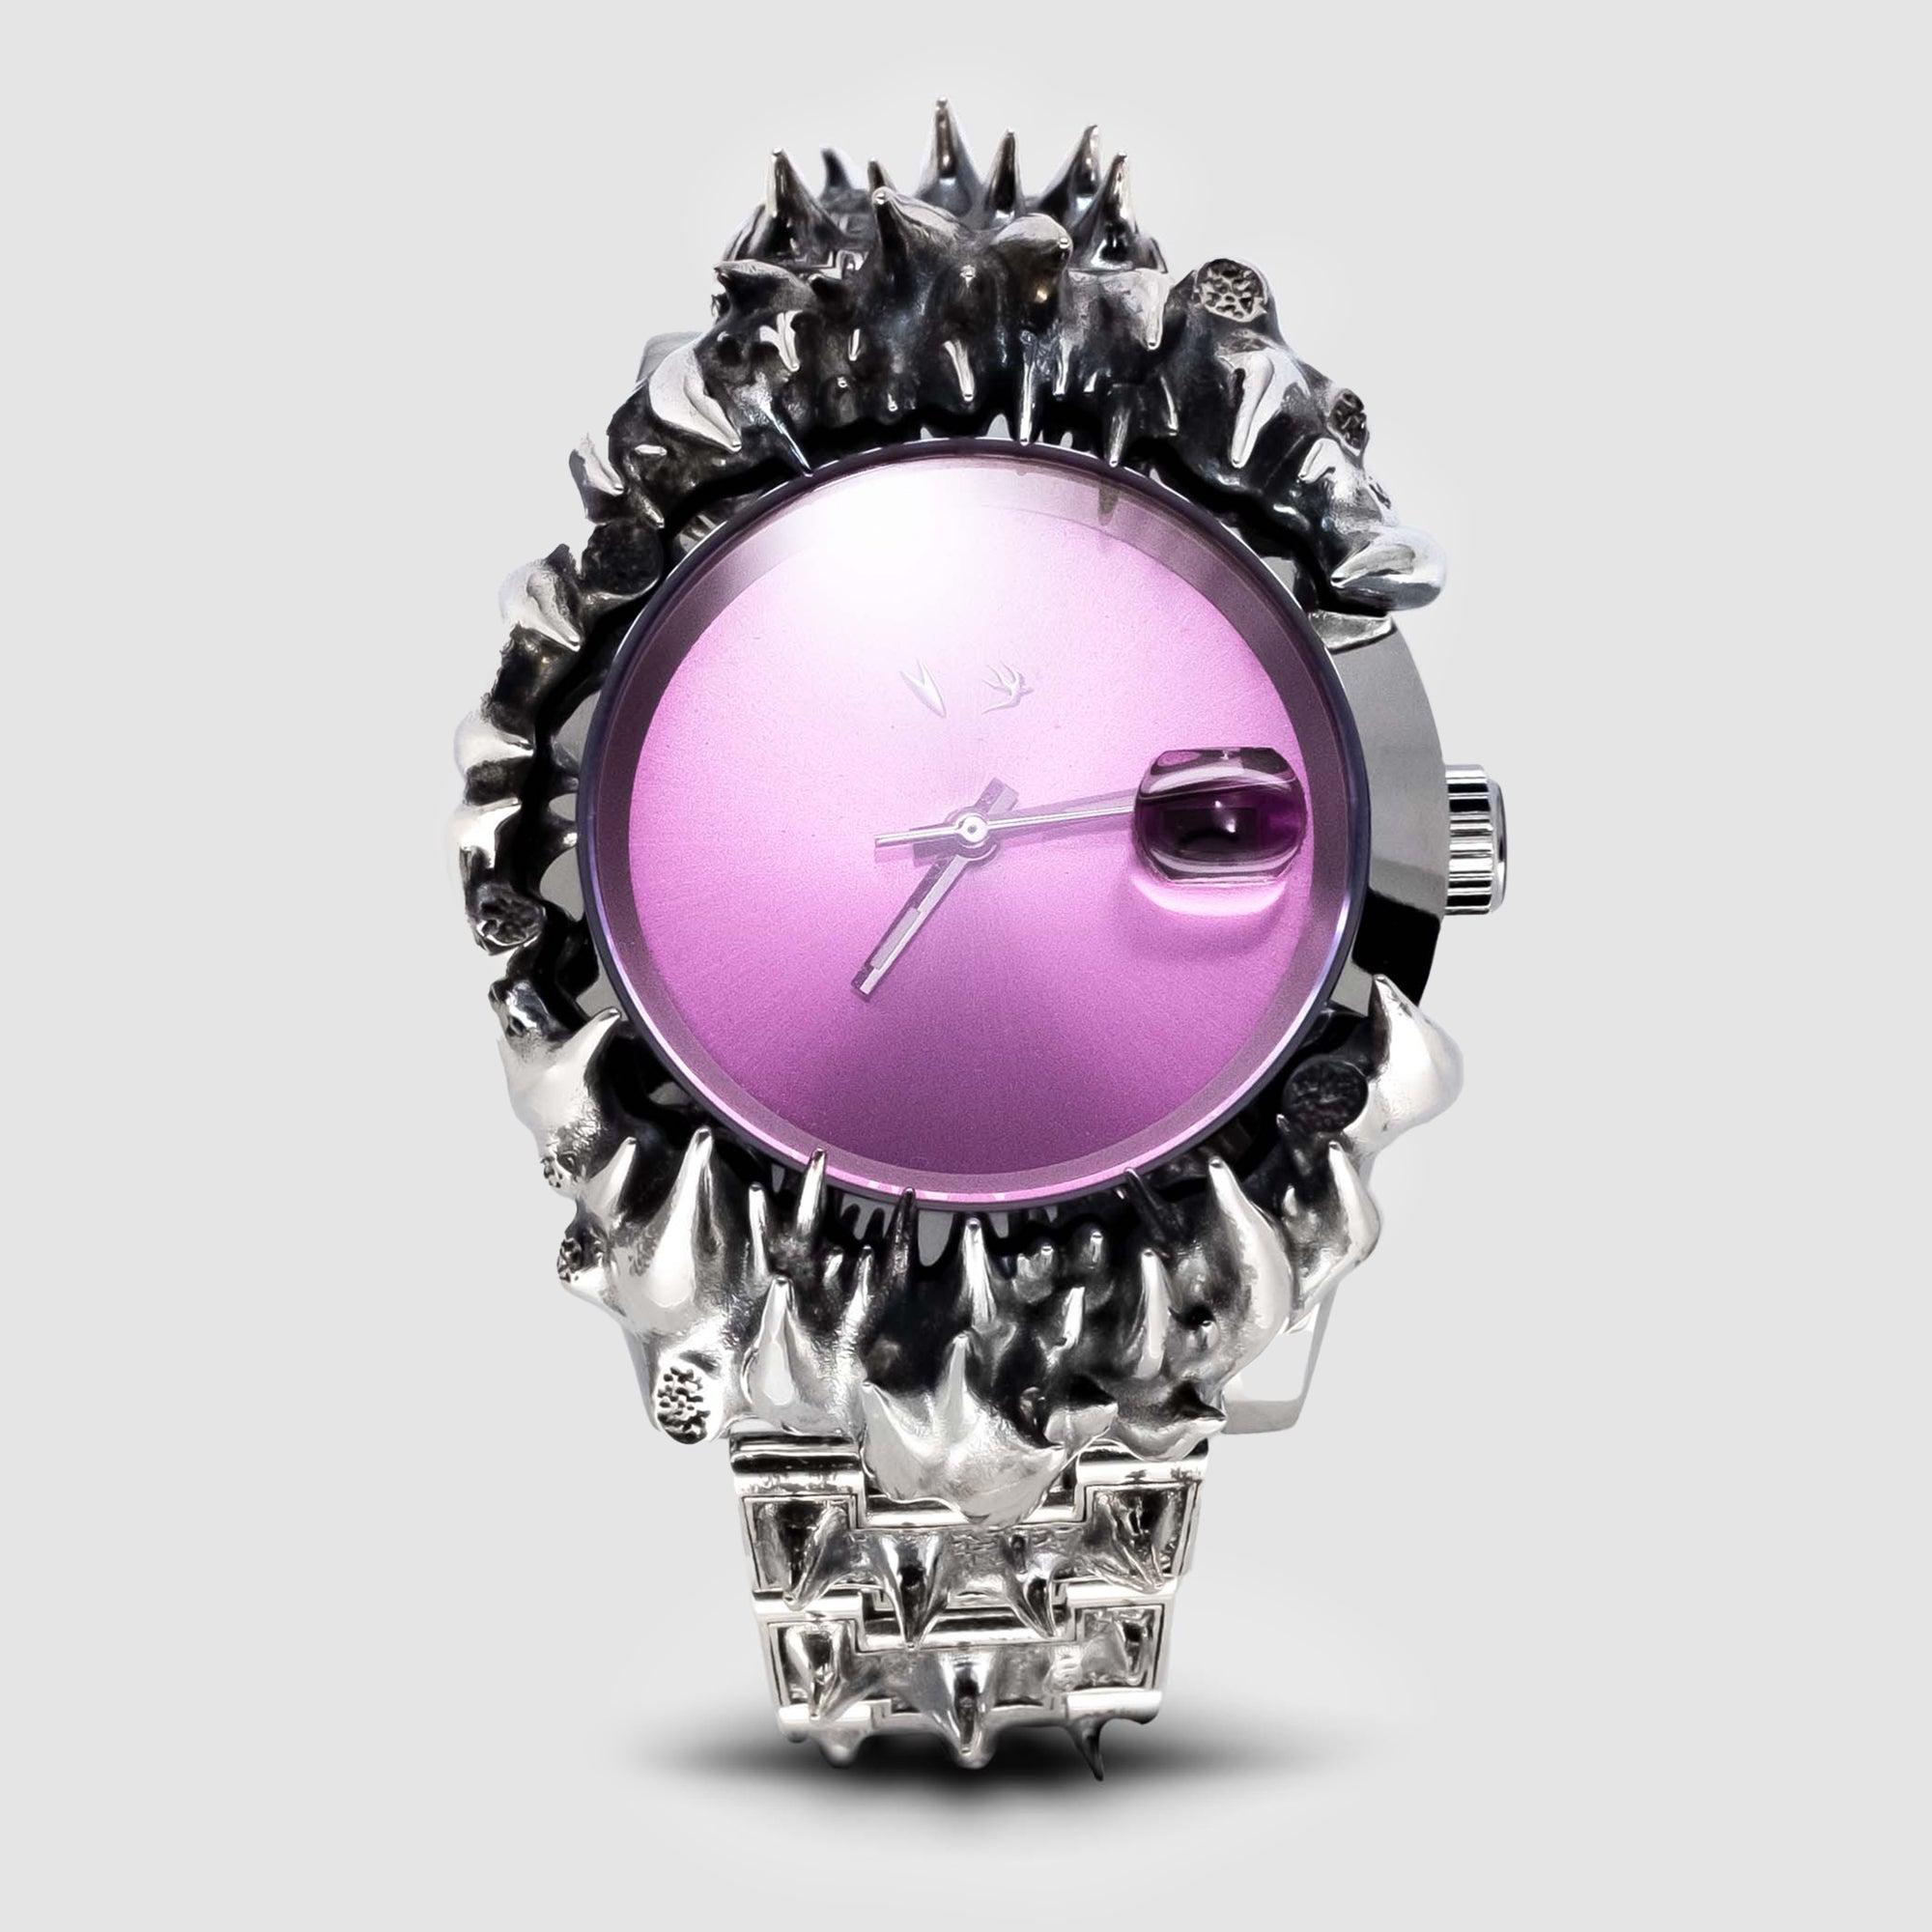 Alabaster Industries Thorn Watch with Pink Dial by ALABASTER INDUSTRIES LLC